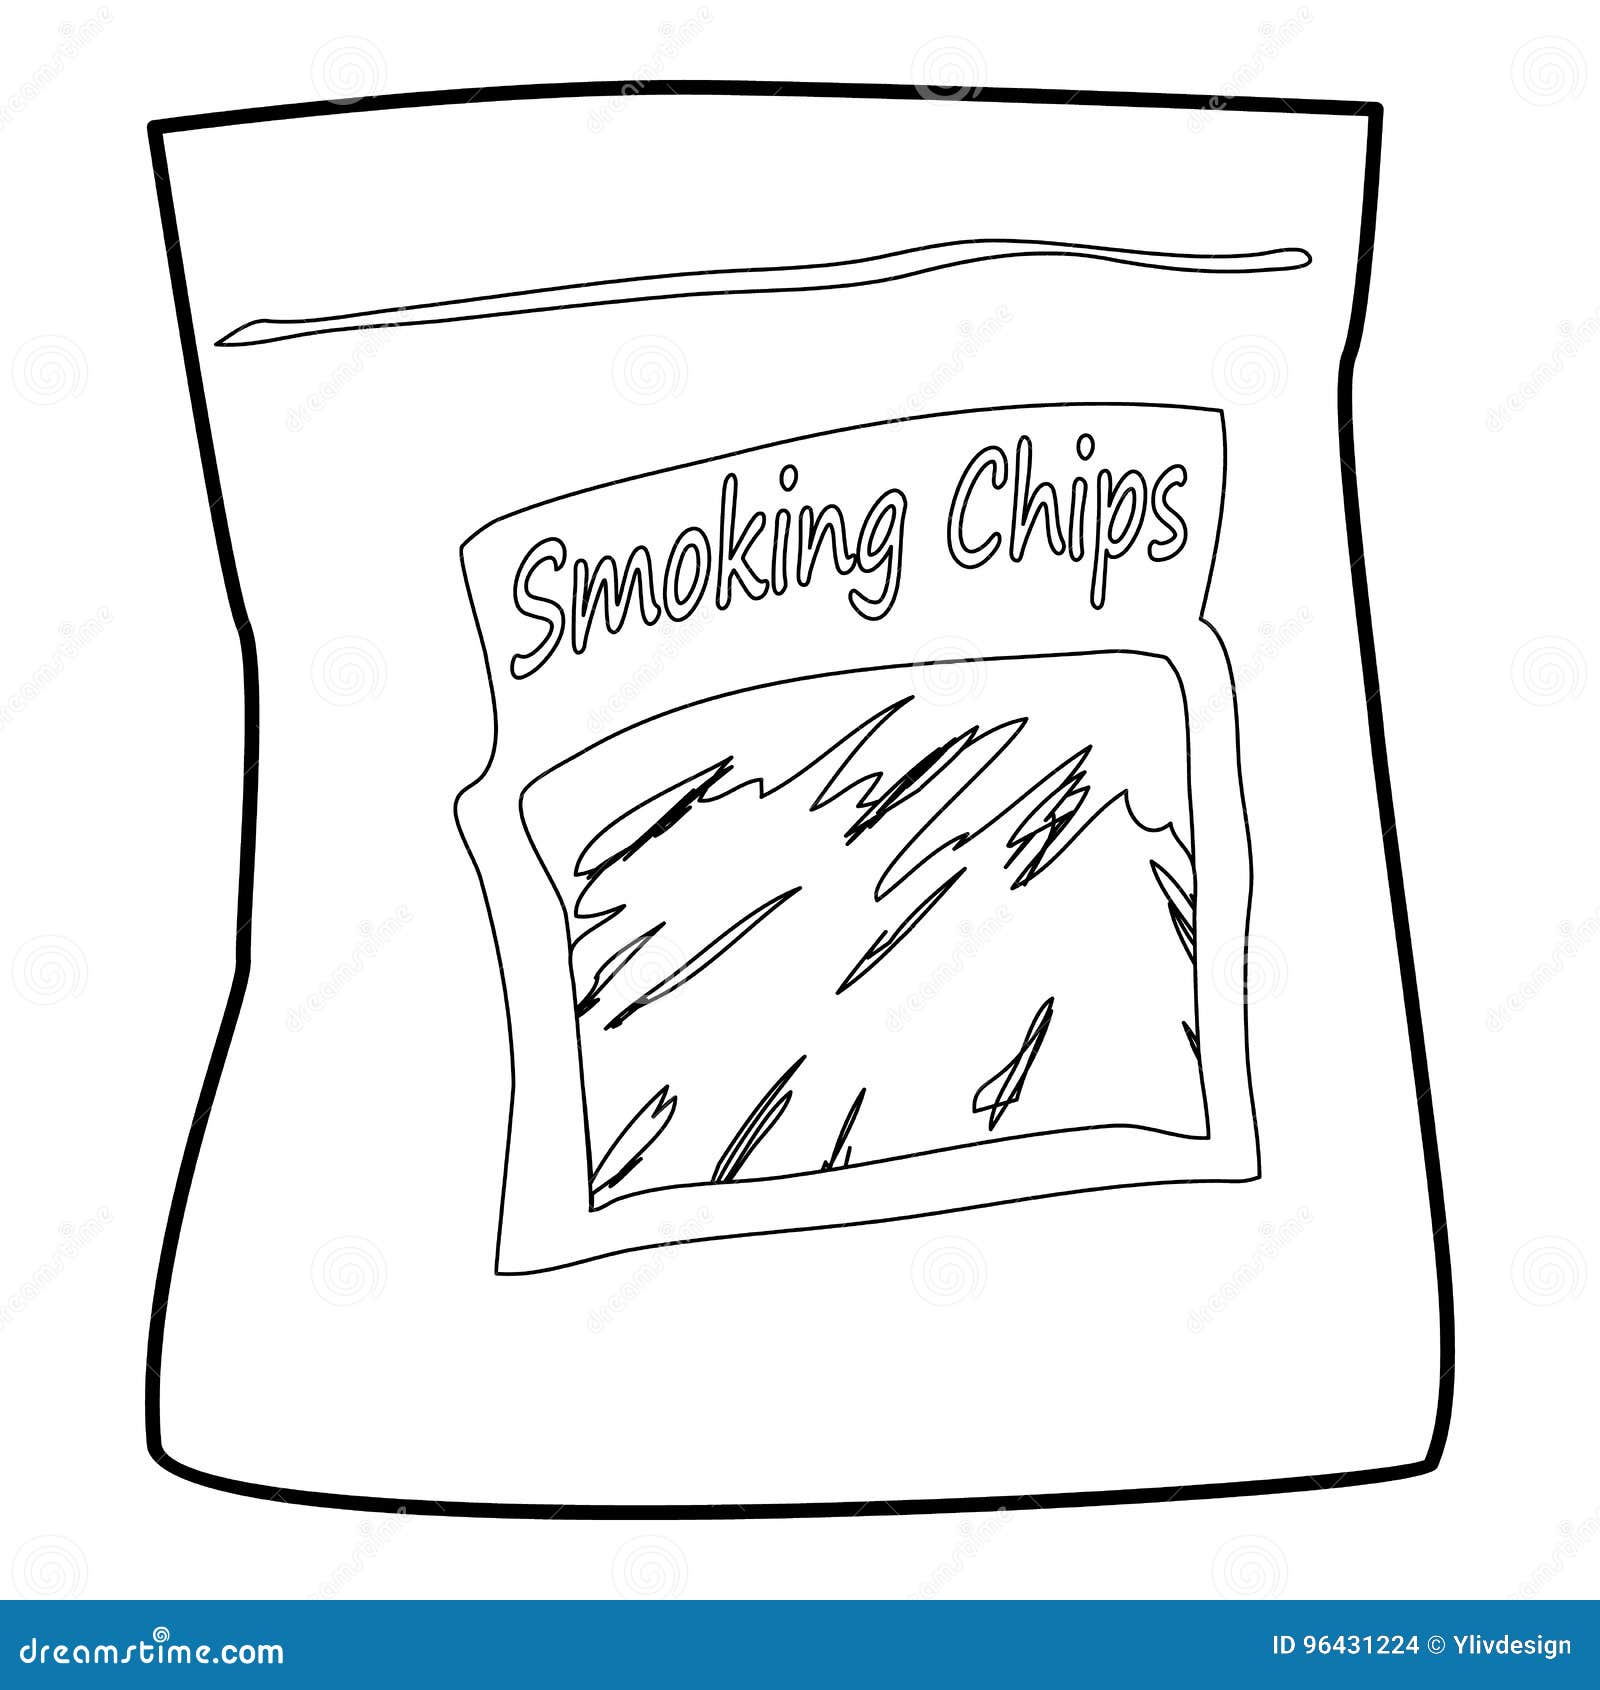 Smoking chips icon outline stock vector. Illustration of grilling ...